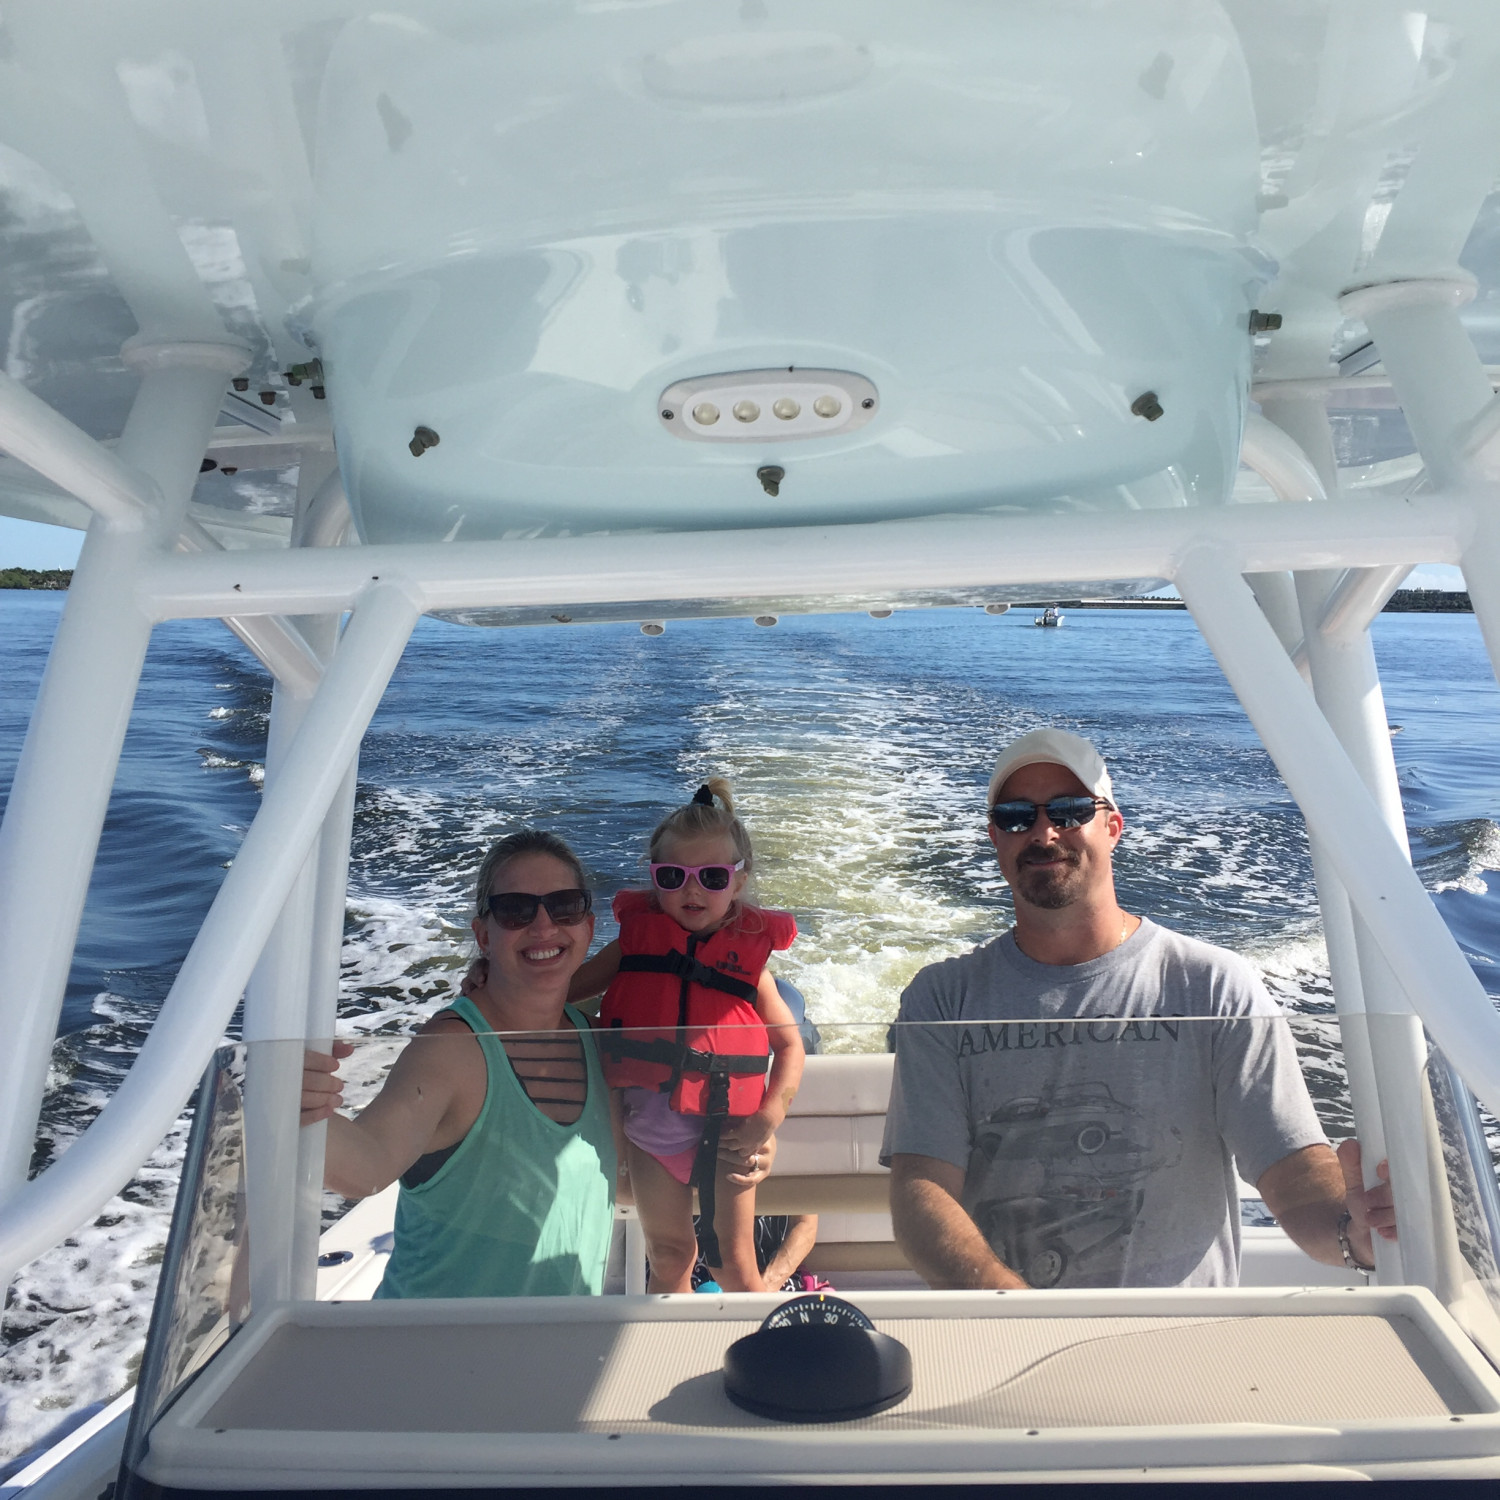 Great day on the water with my wife, daughter and parents!